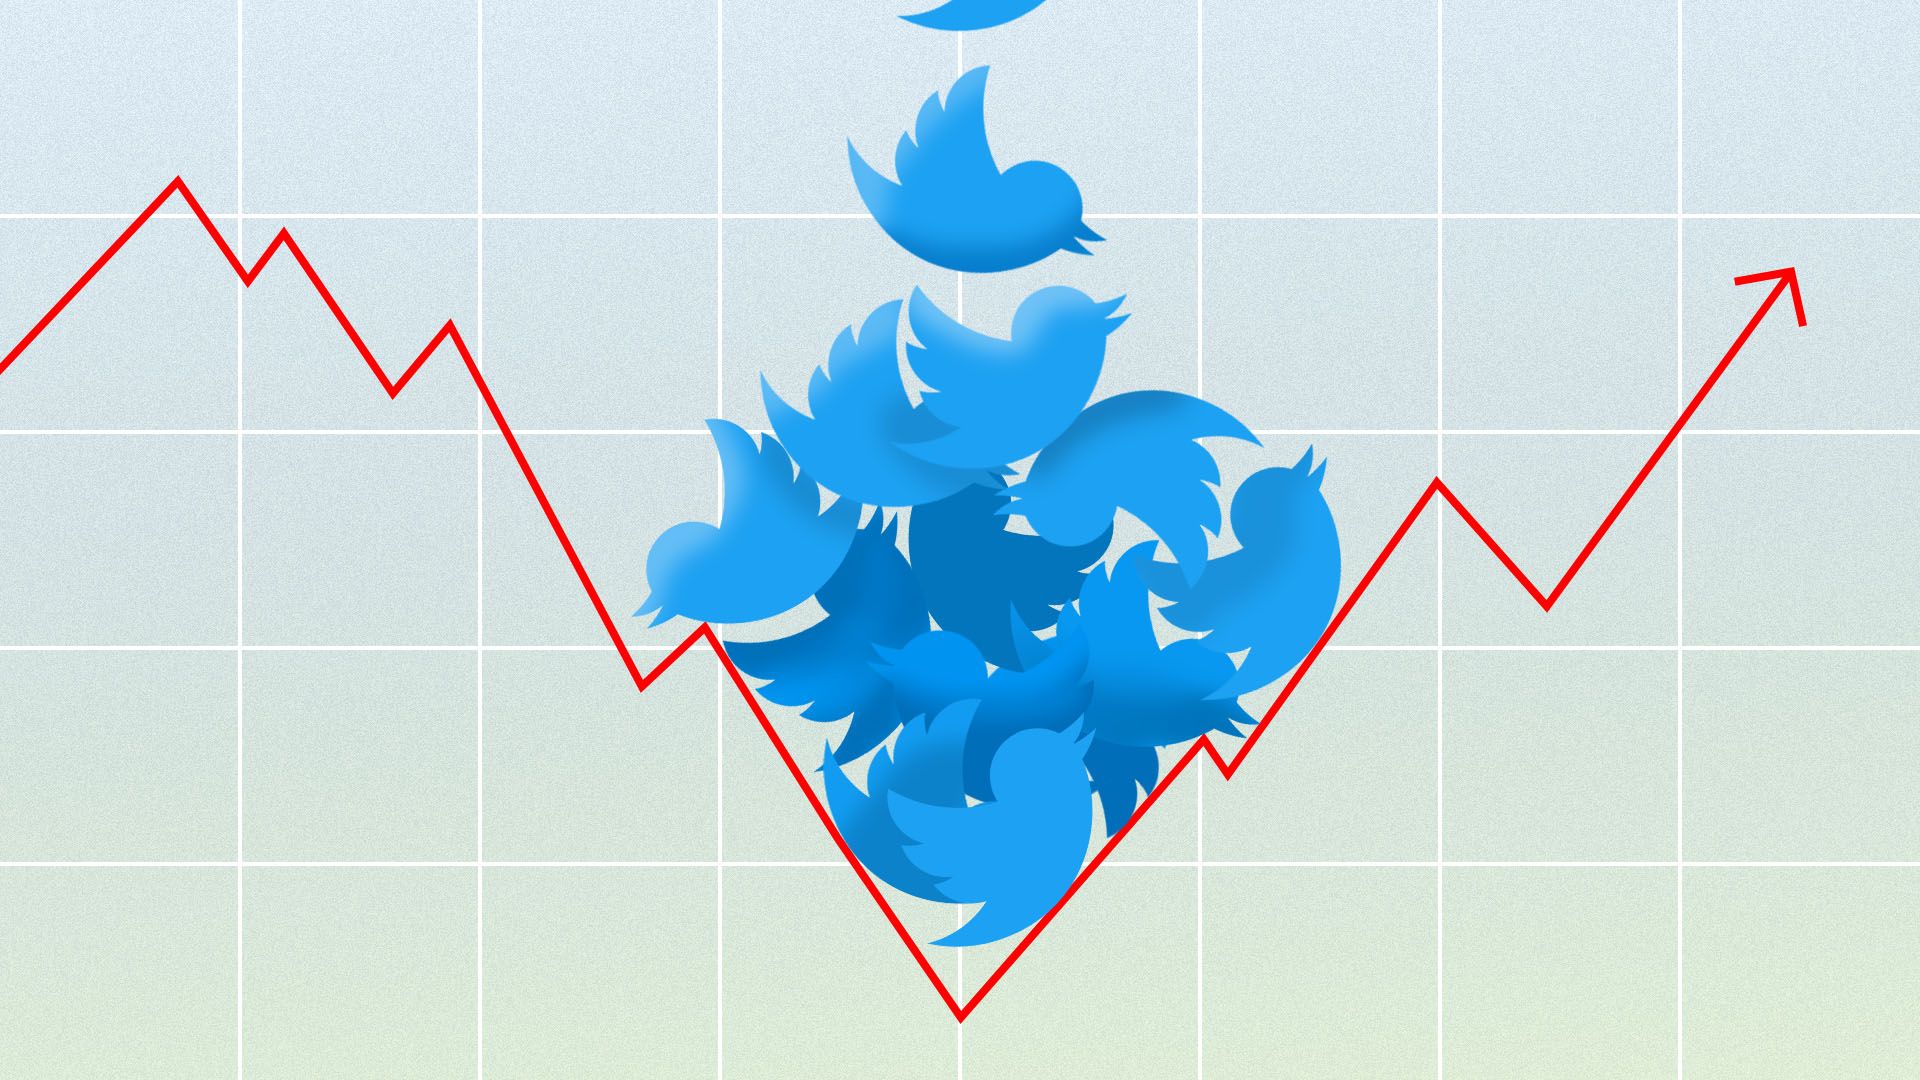 Illustration of line chart being weighed down by a pile of Twitter birds